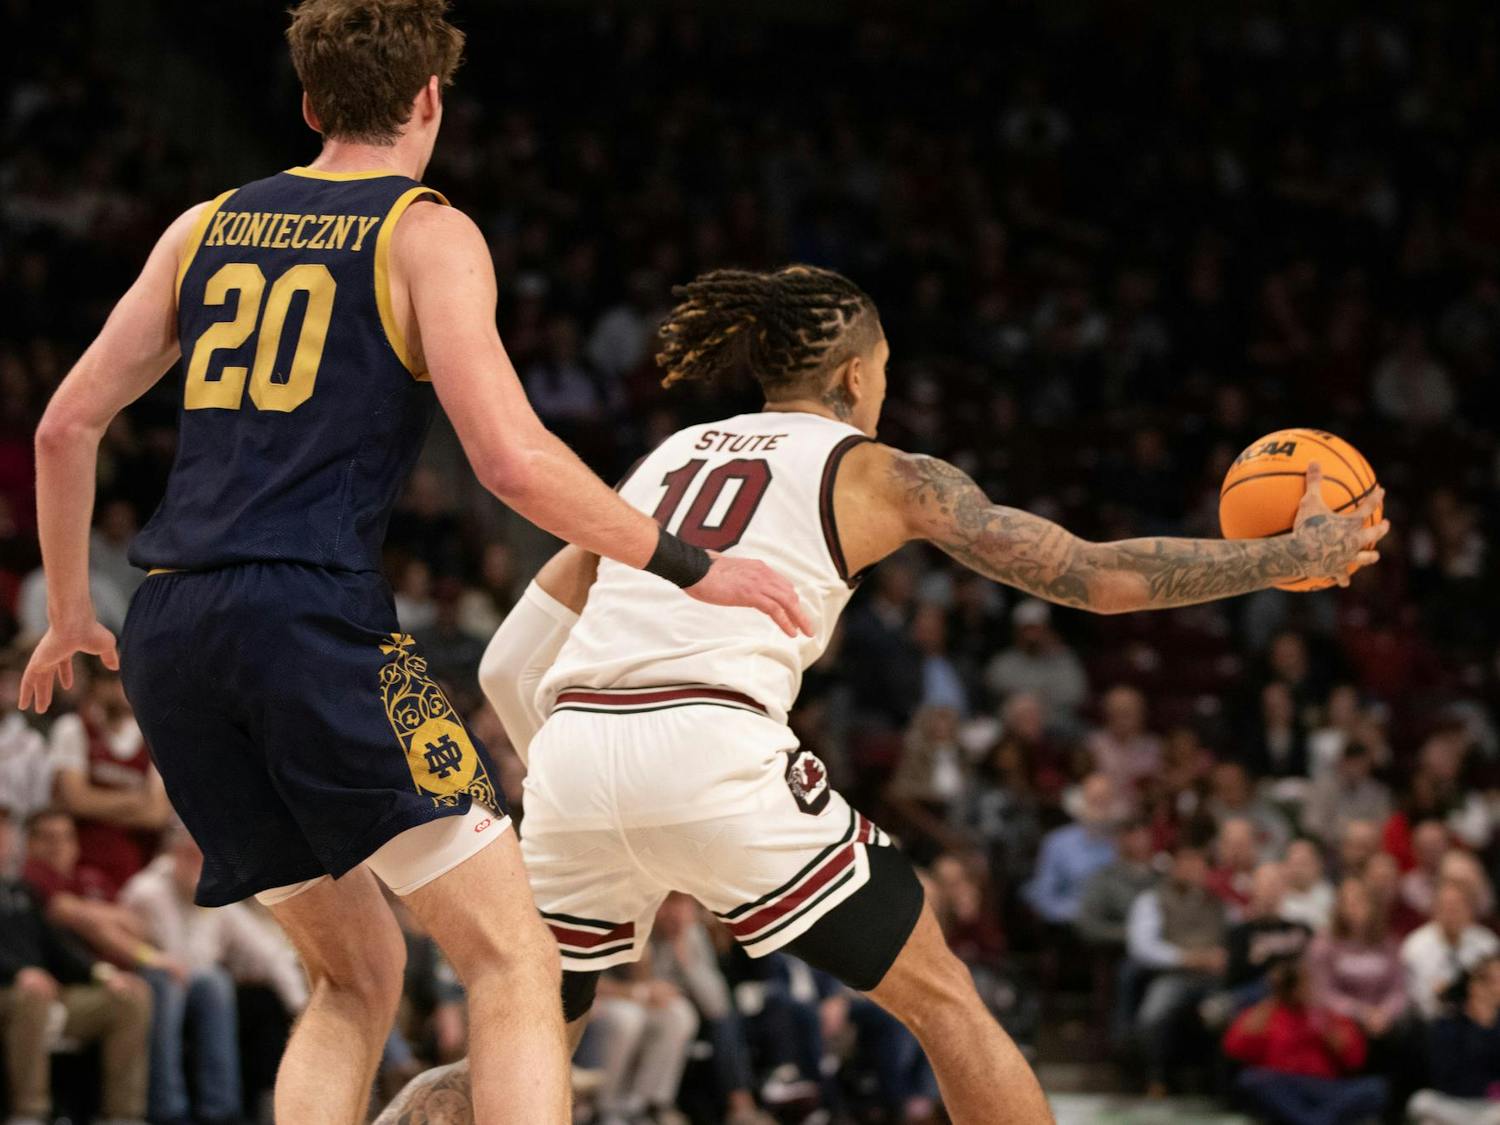 Junior guard Myles Stute catches a pass from his teammate and begins to set up the offense during a game on Nov. 28, 2023. Stute contributed one block but missed all of his field goals as South Carolina beat Notre Dame 65-53.